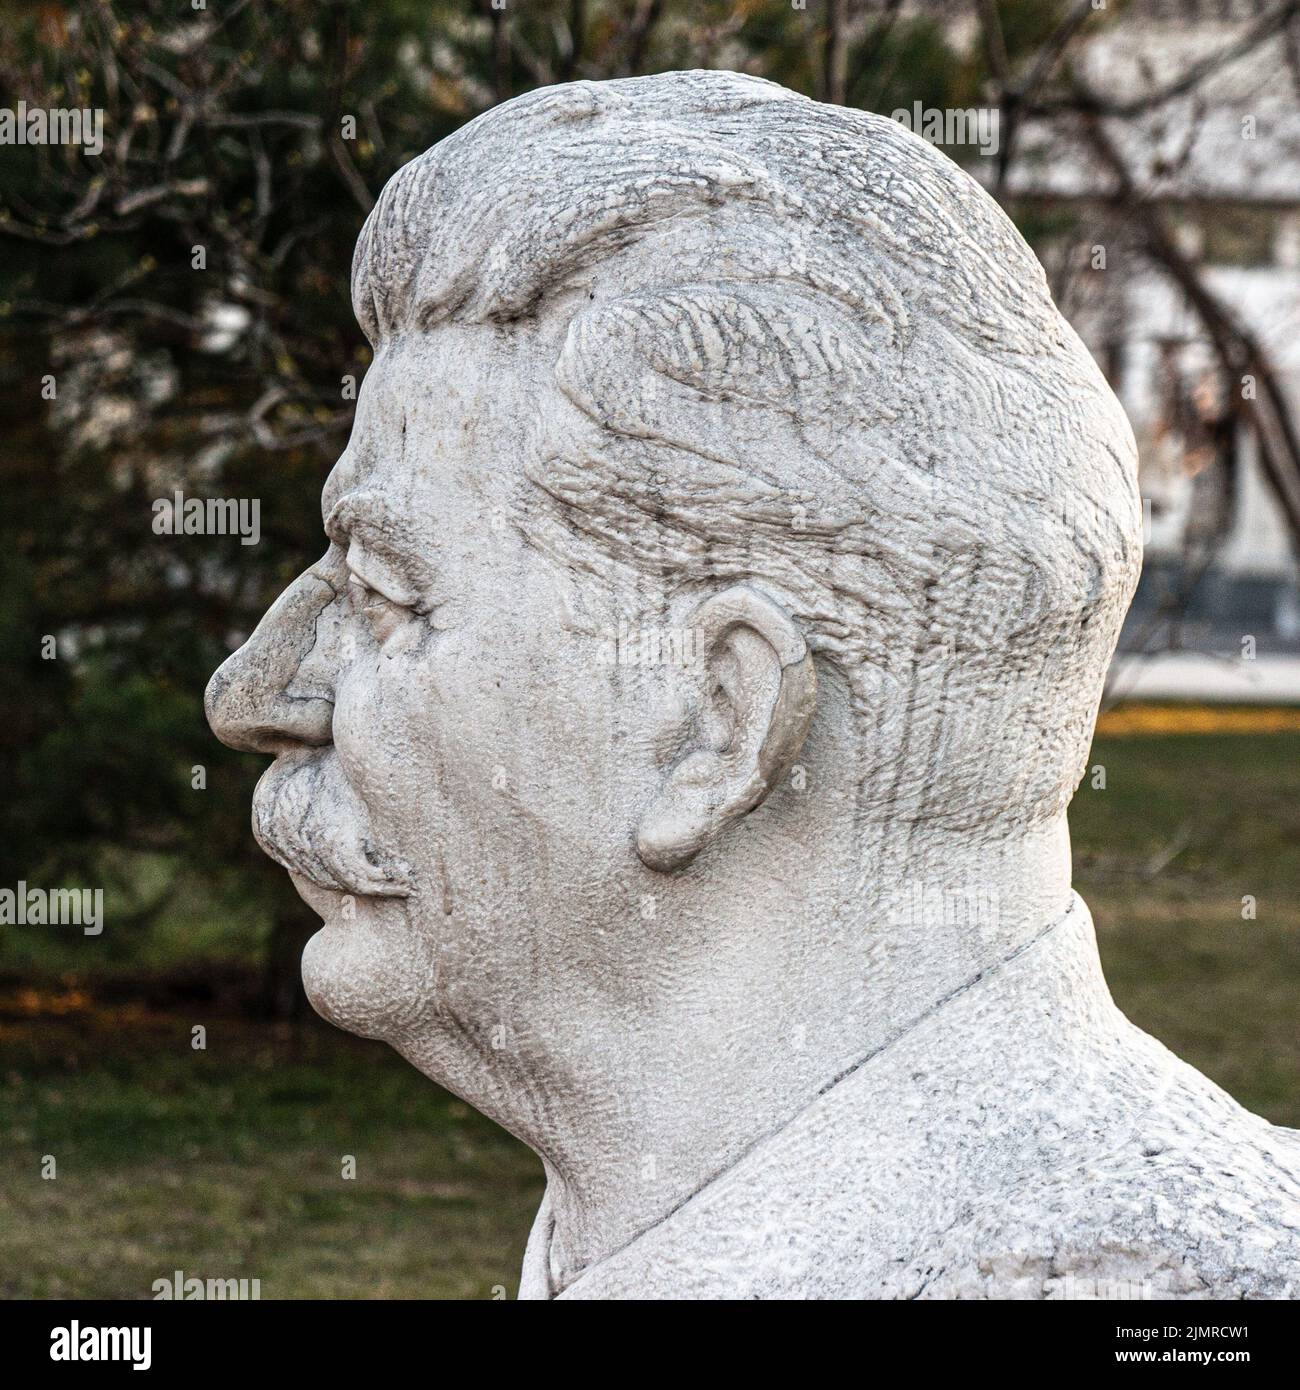 MOSCOW, RUSSIA - March 24, 2020 Side angle view of marble bust of Joseph Vissarionovich Stalin, in Fallen Monument Park Stock Photo